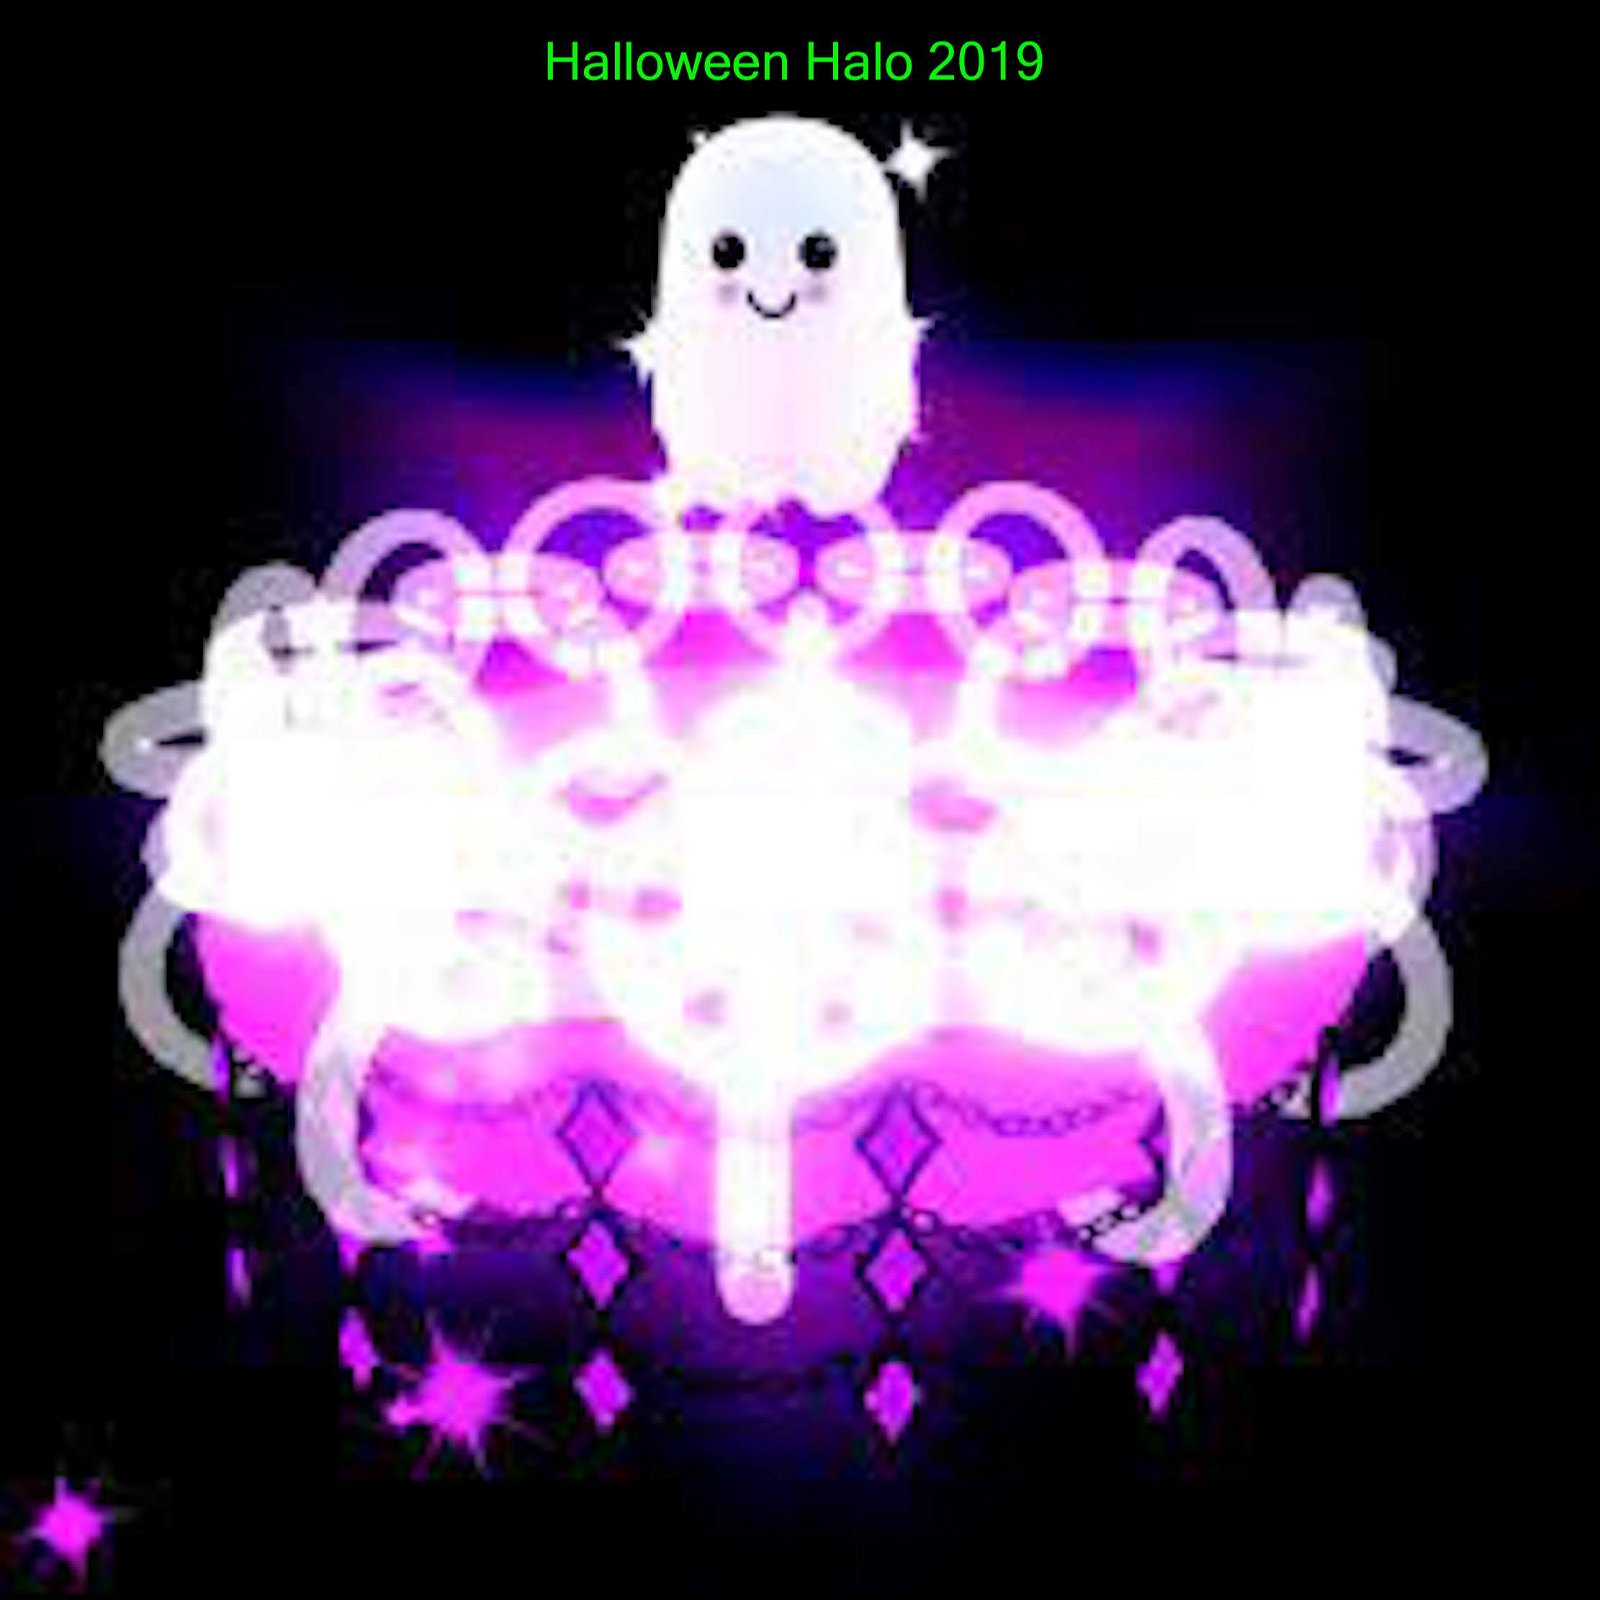 Selling - Selling items from Royale High - Halloween Halo 2019